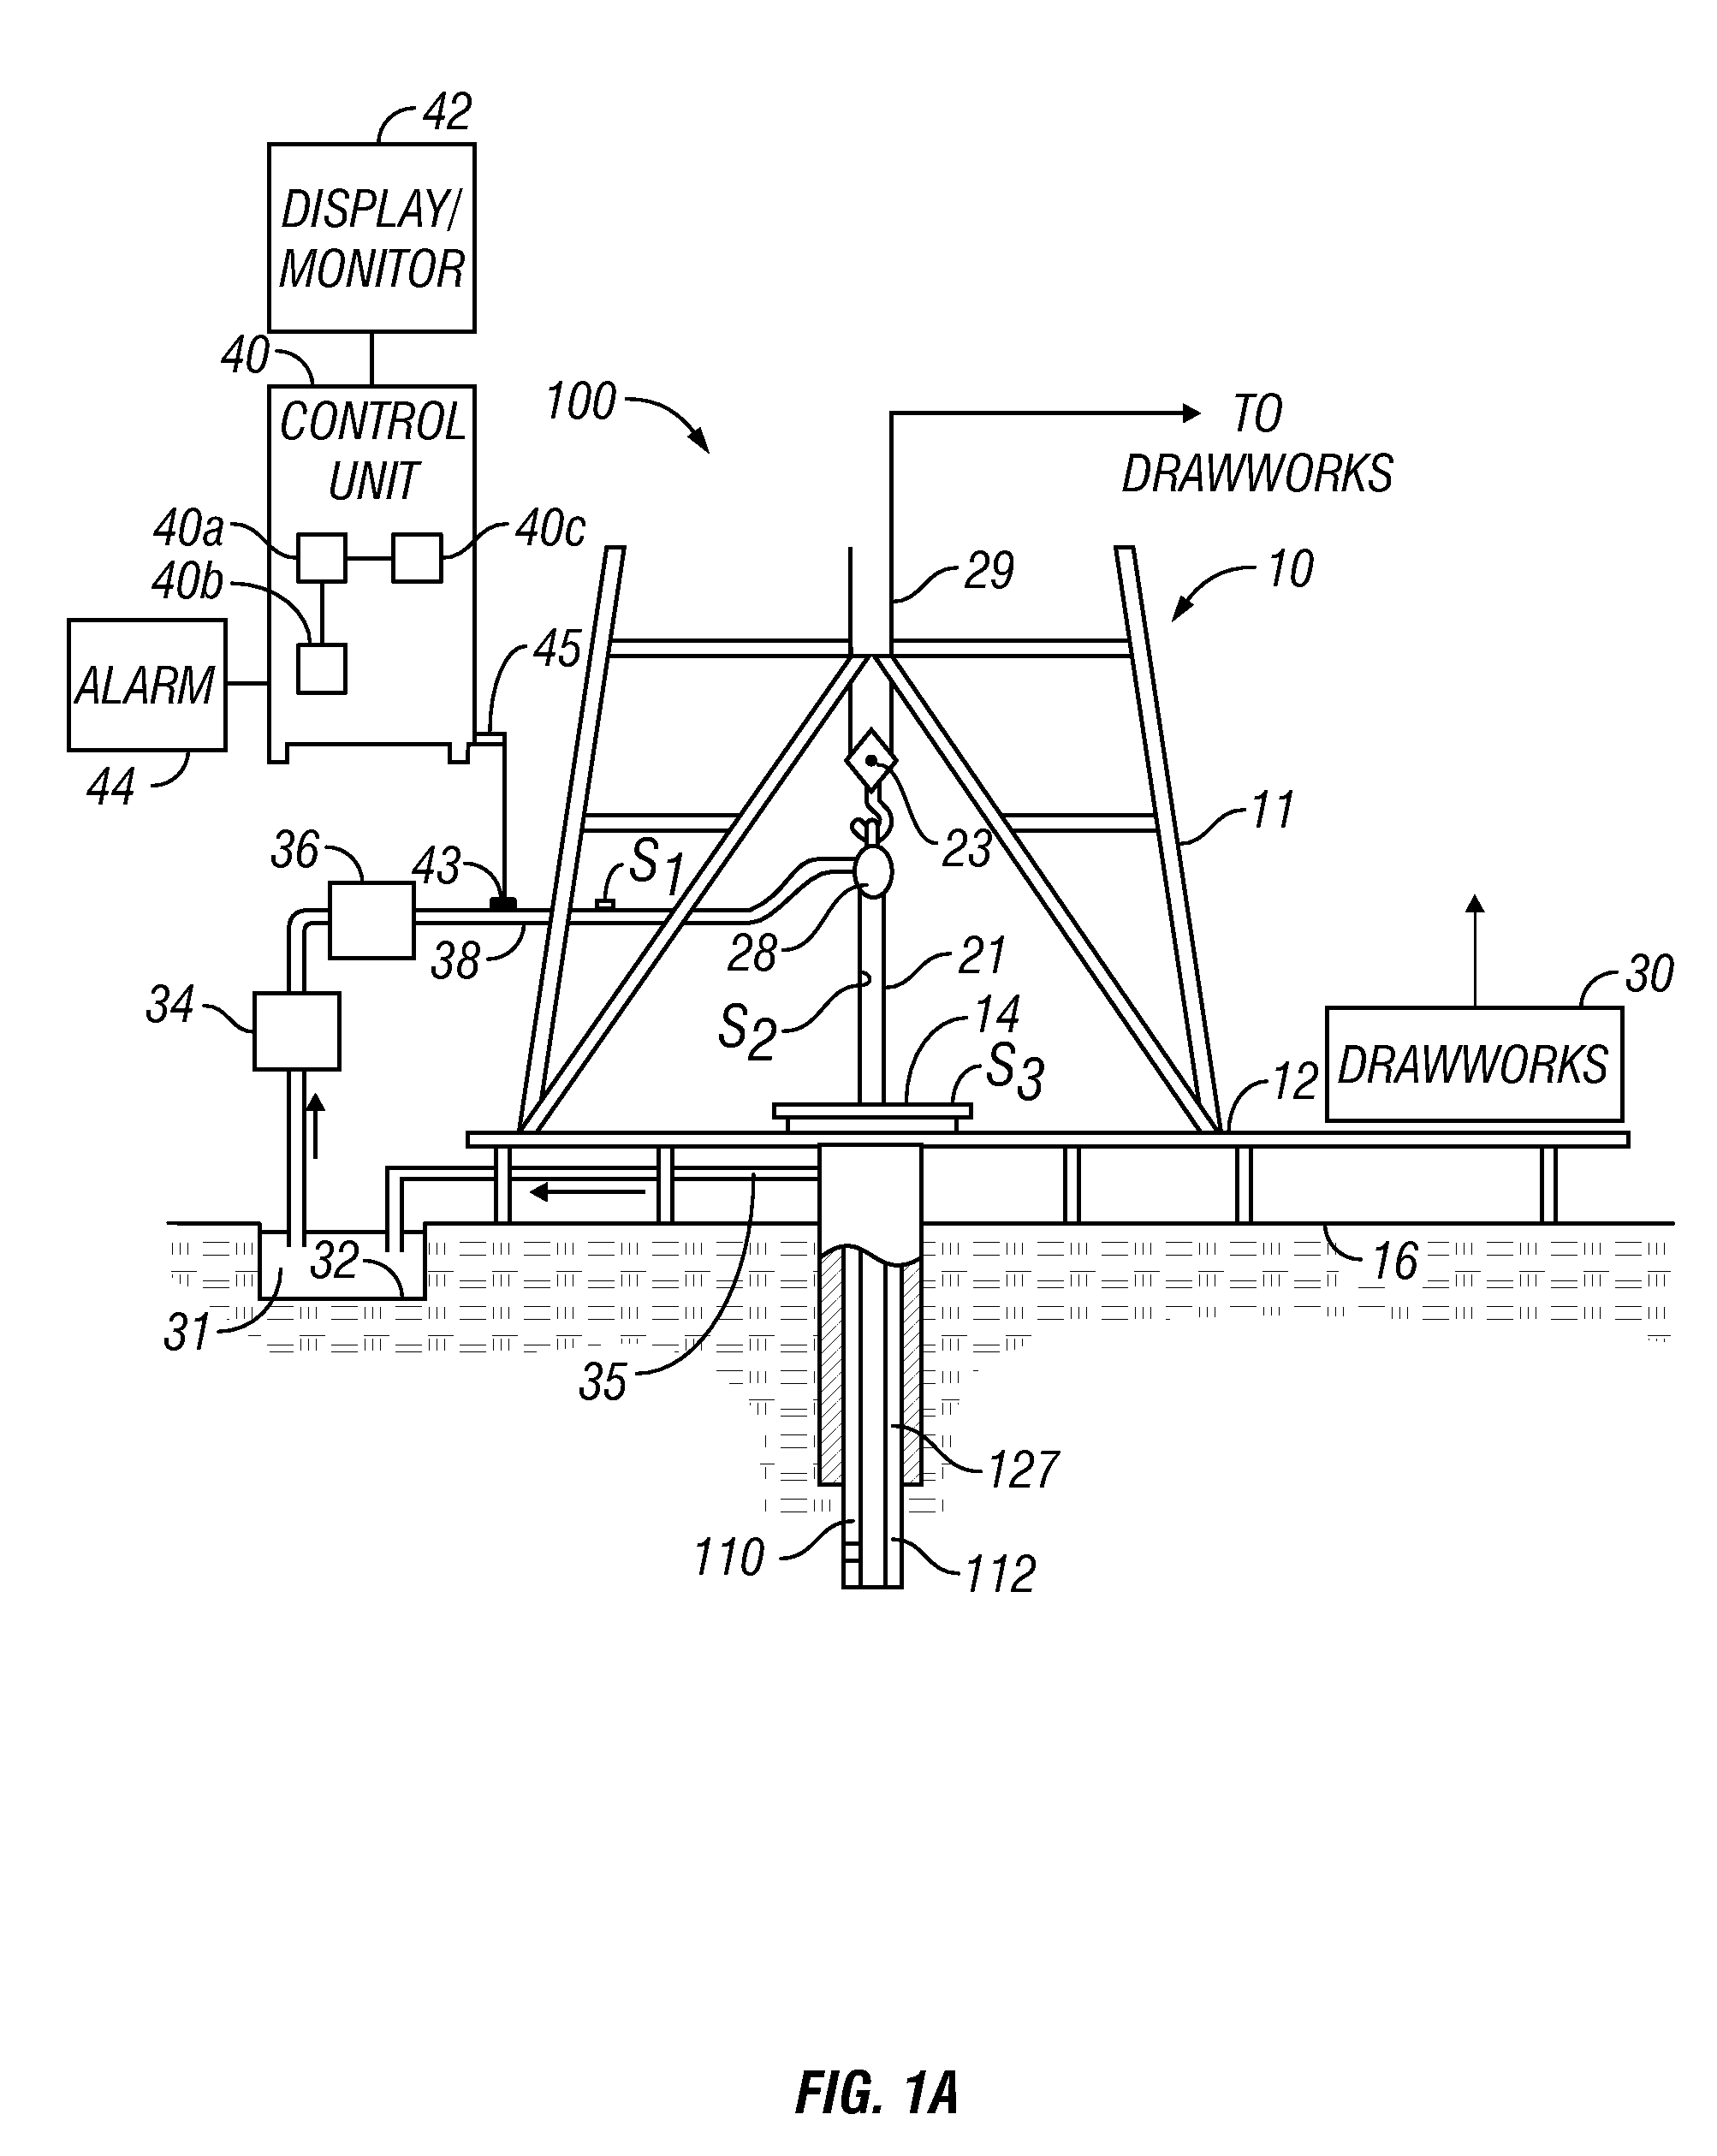 Apparatus and Methods for Continuous Tomography of Cores